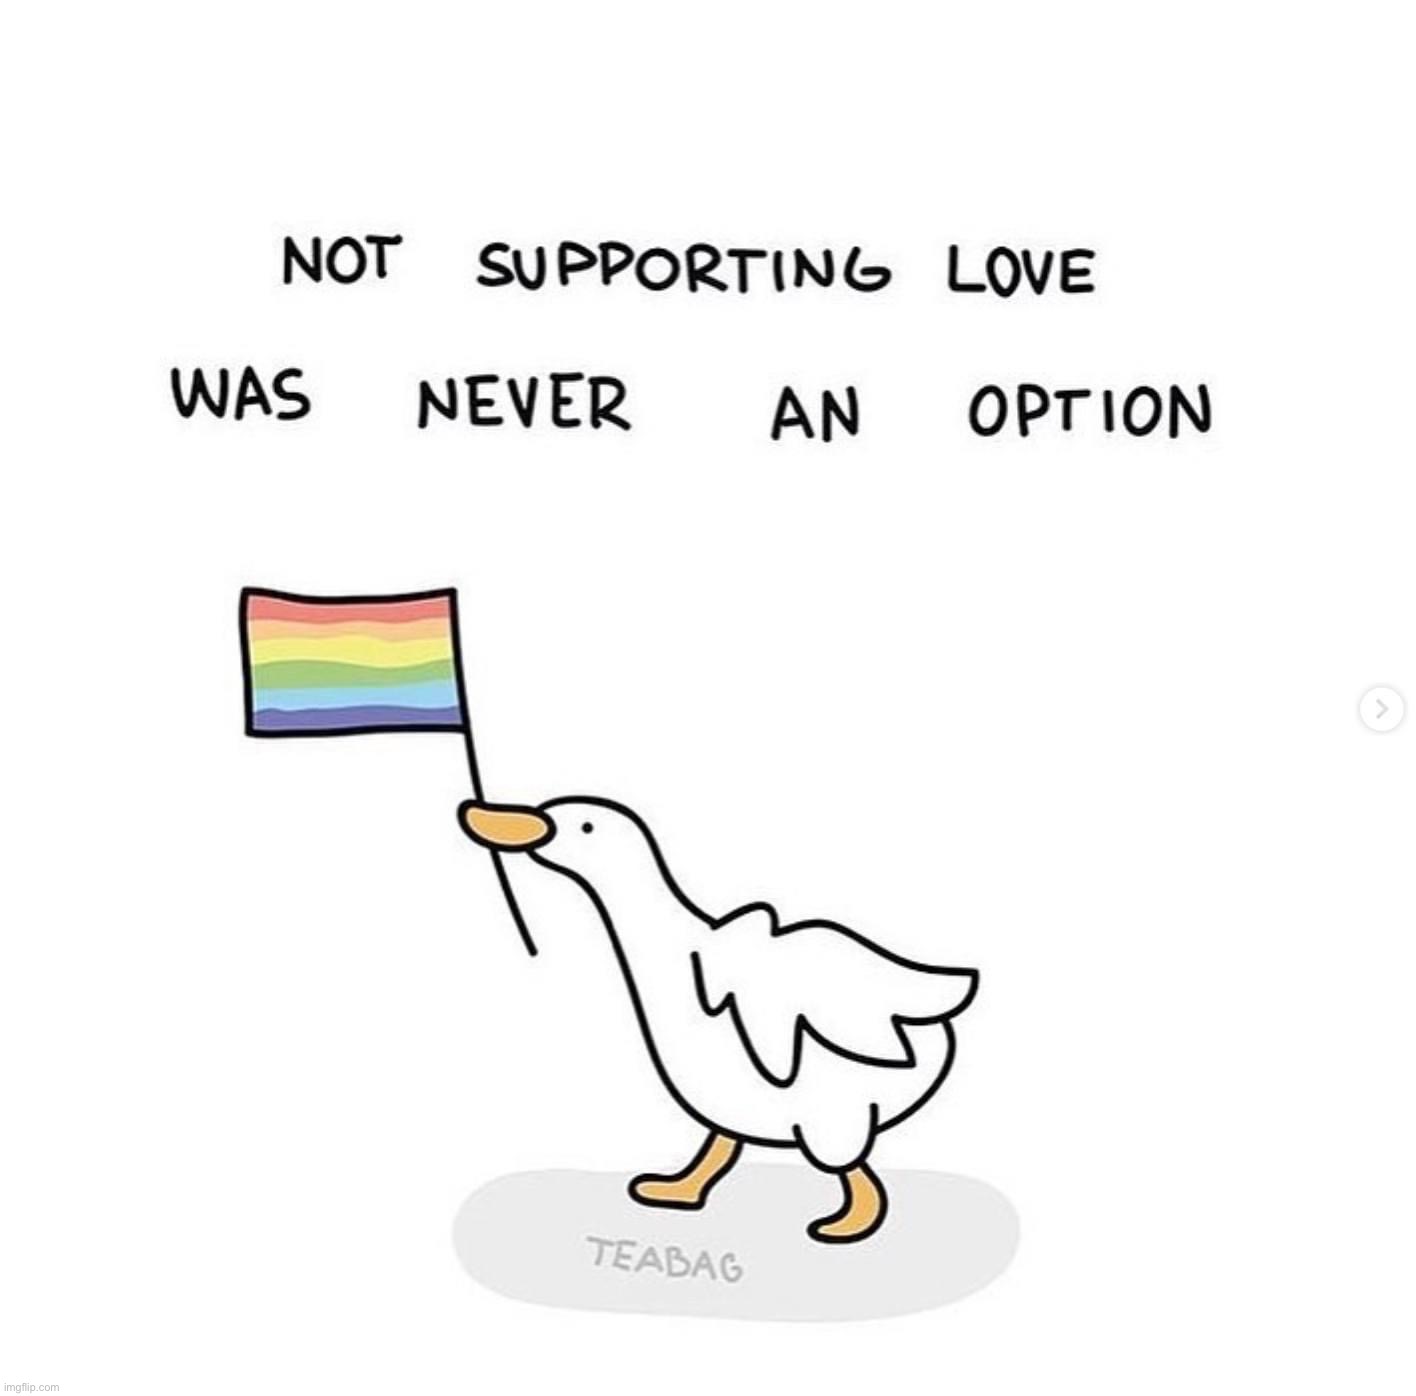 Not supporting love was never an option | image tagged in not supporting love was never an option,lgbtq,lgbt,peace was never an option,untitled goose peace was never an option,love | made w/ Imgflip meme maker